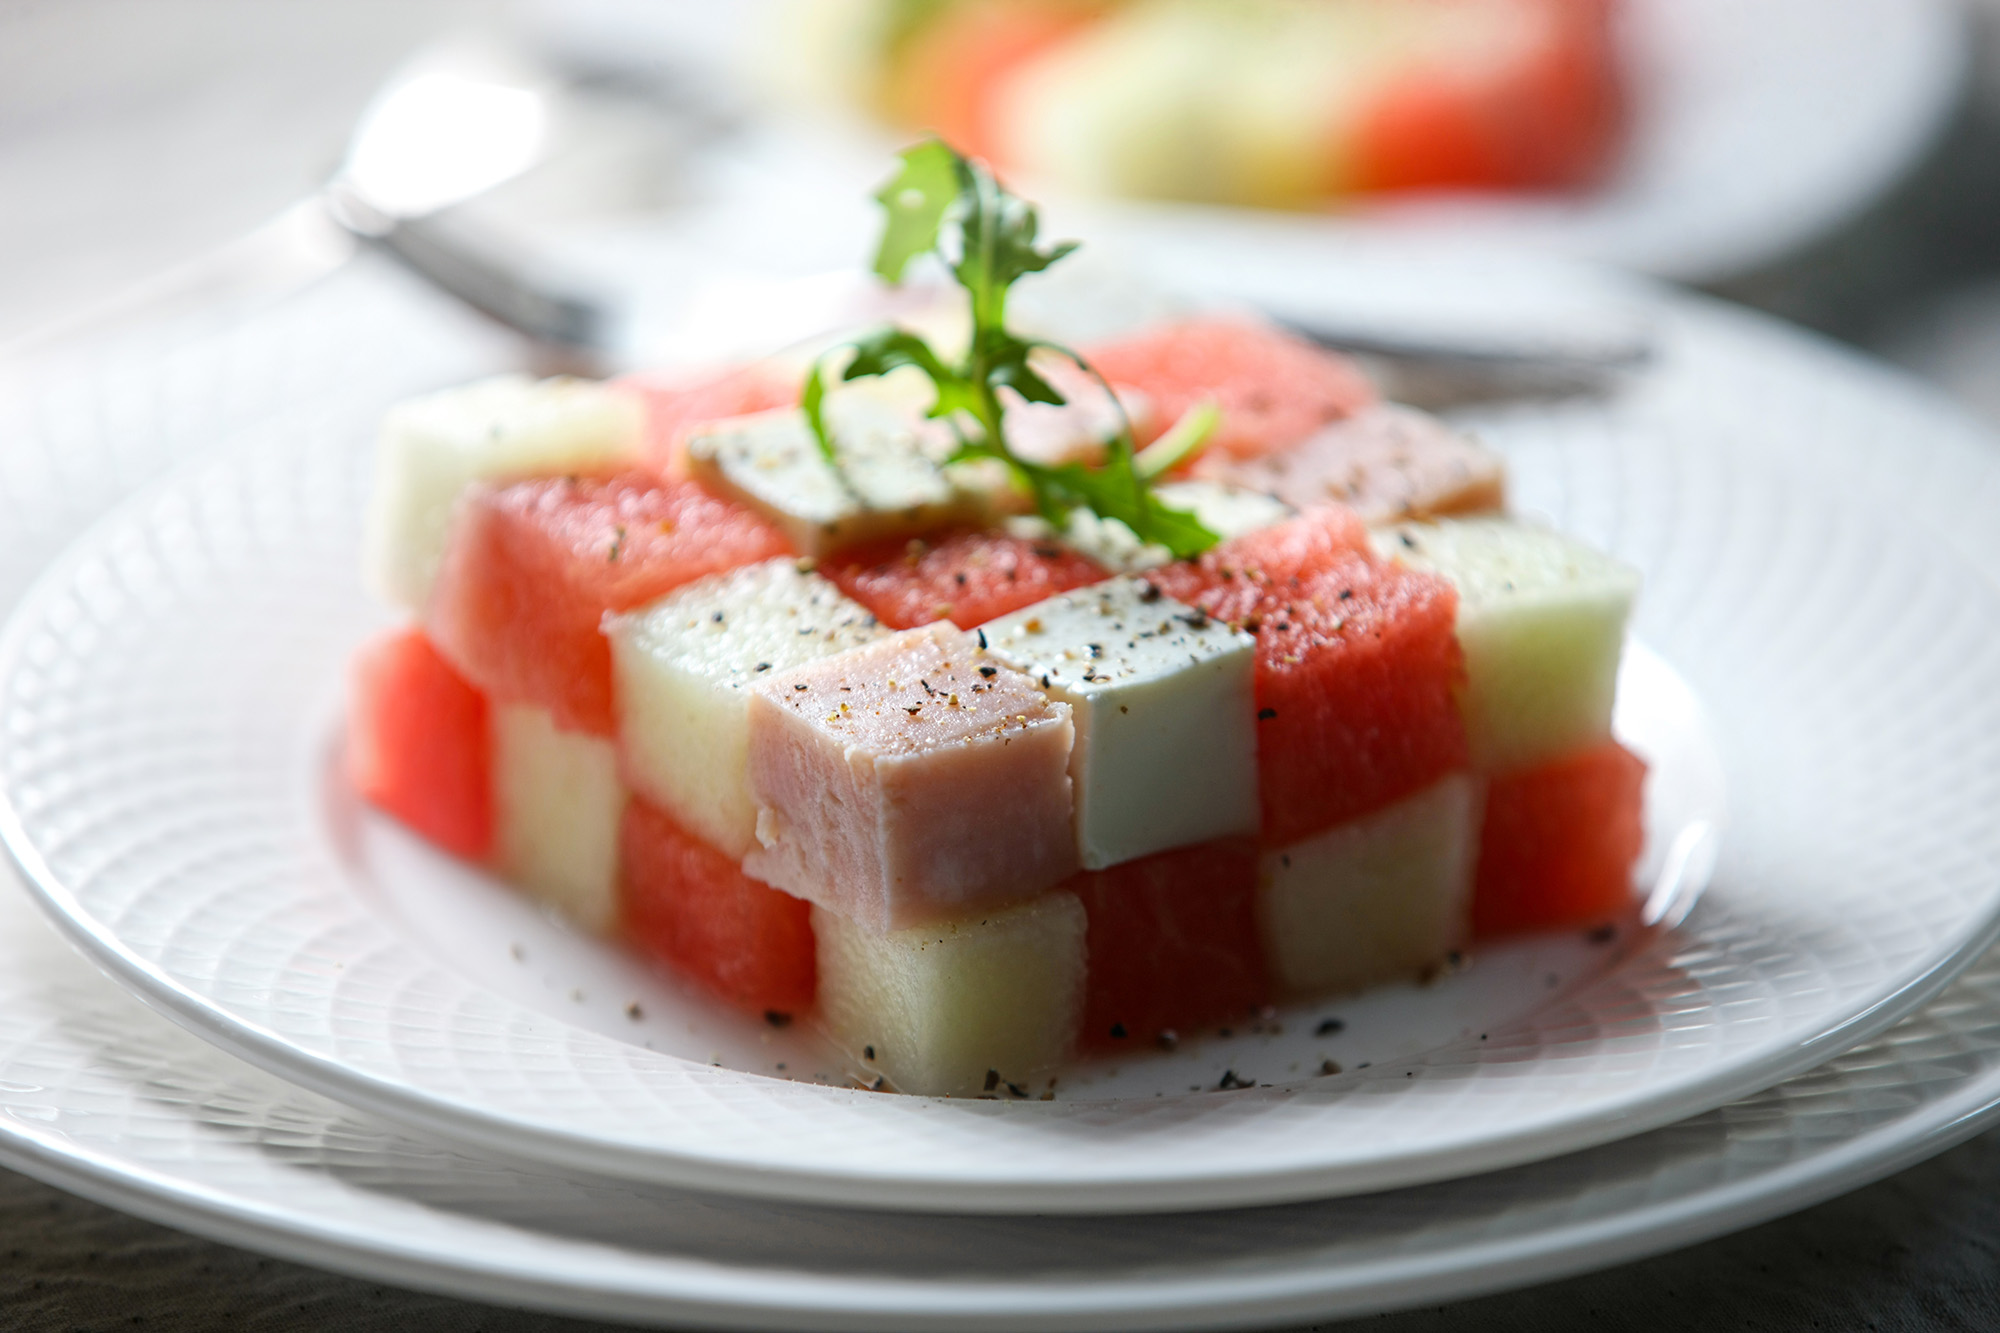 WATERMELON AND MELON APPETIZER SALAD